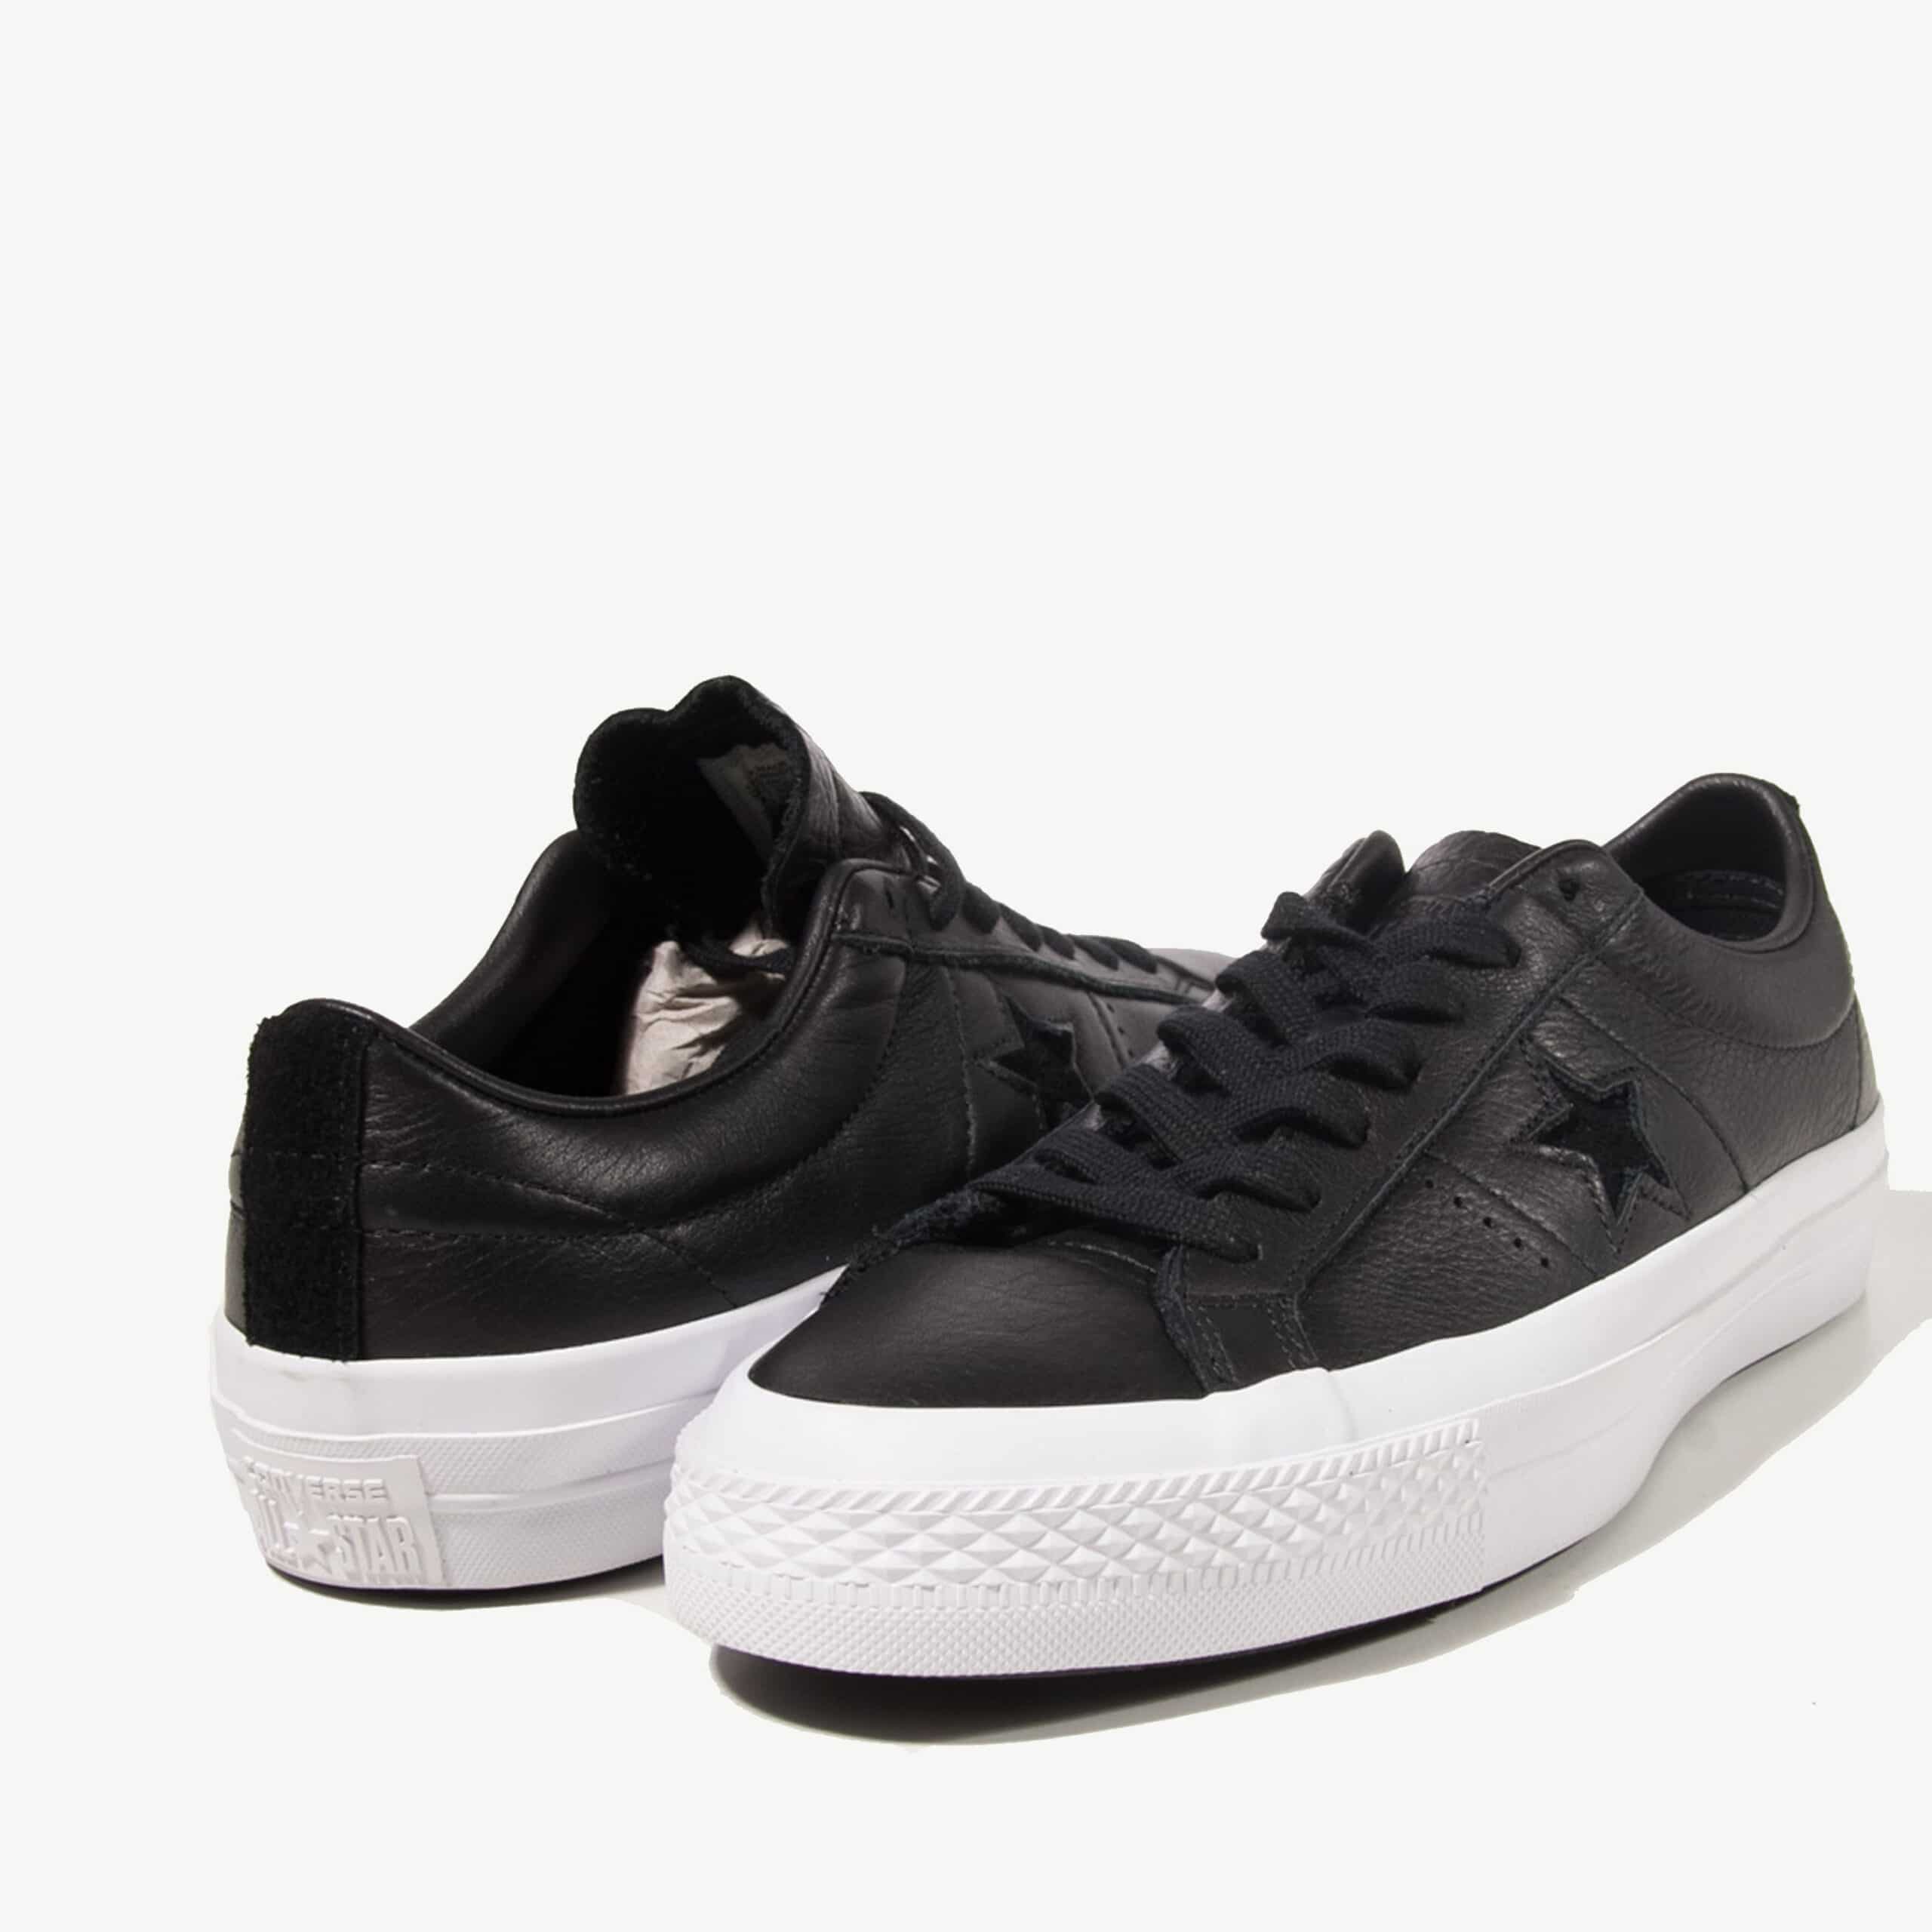 Converse ONE STAR OX Black leather - DCjeans saroual and clothing